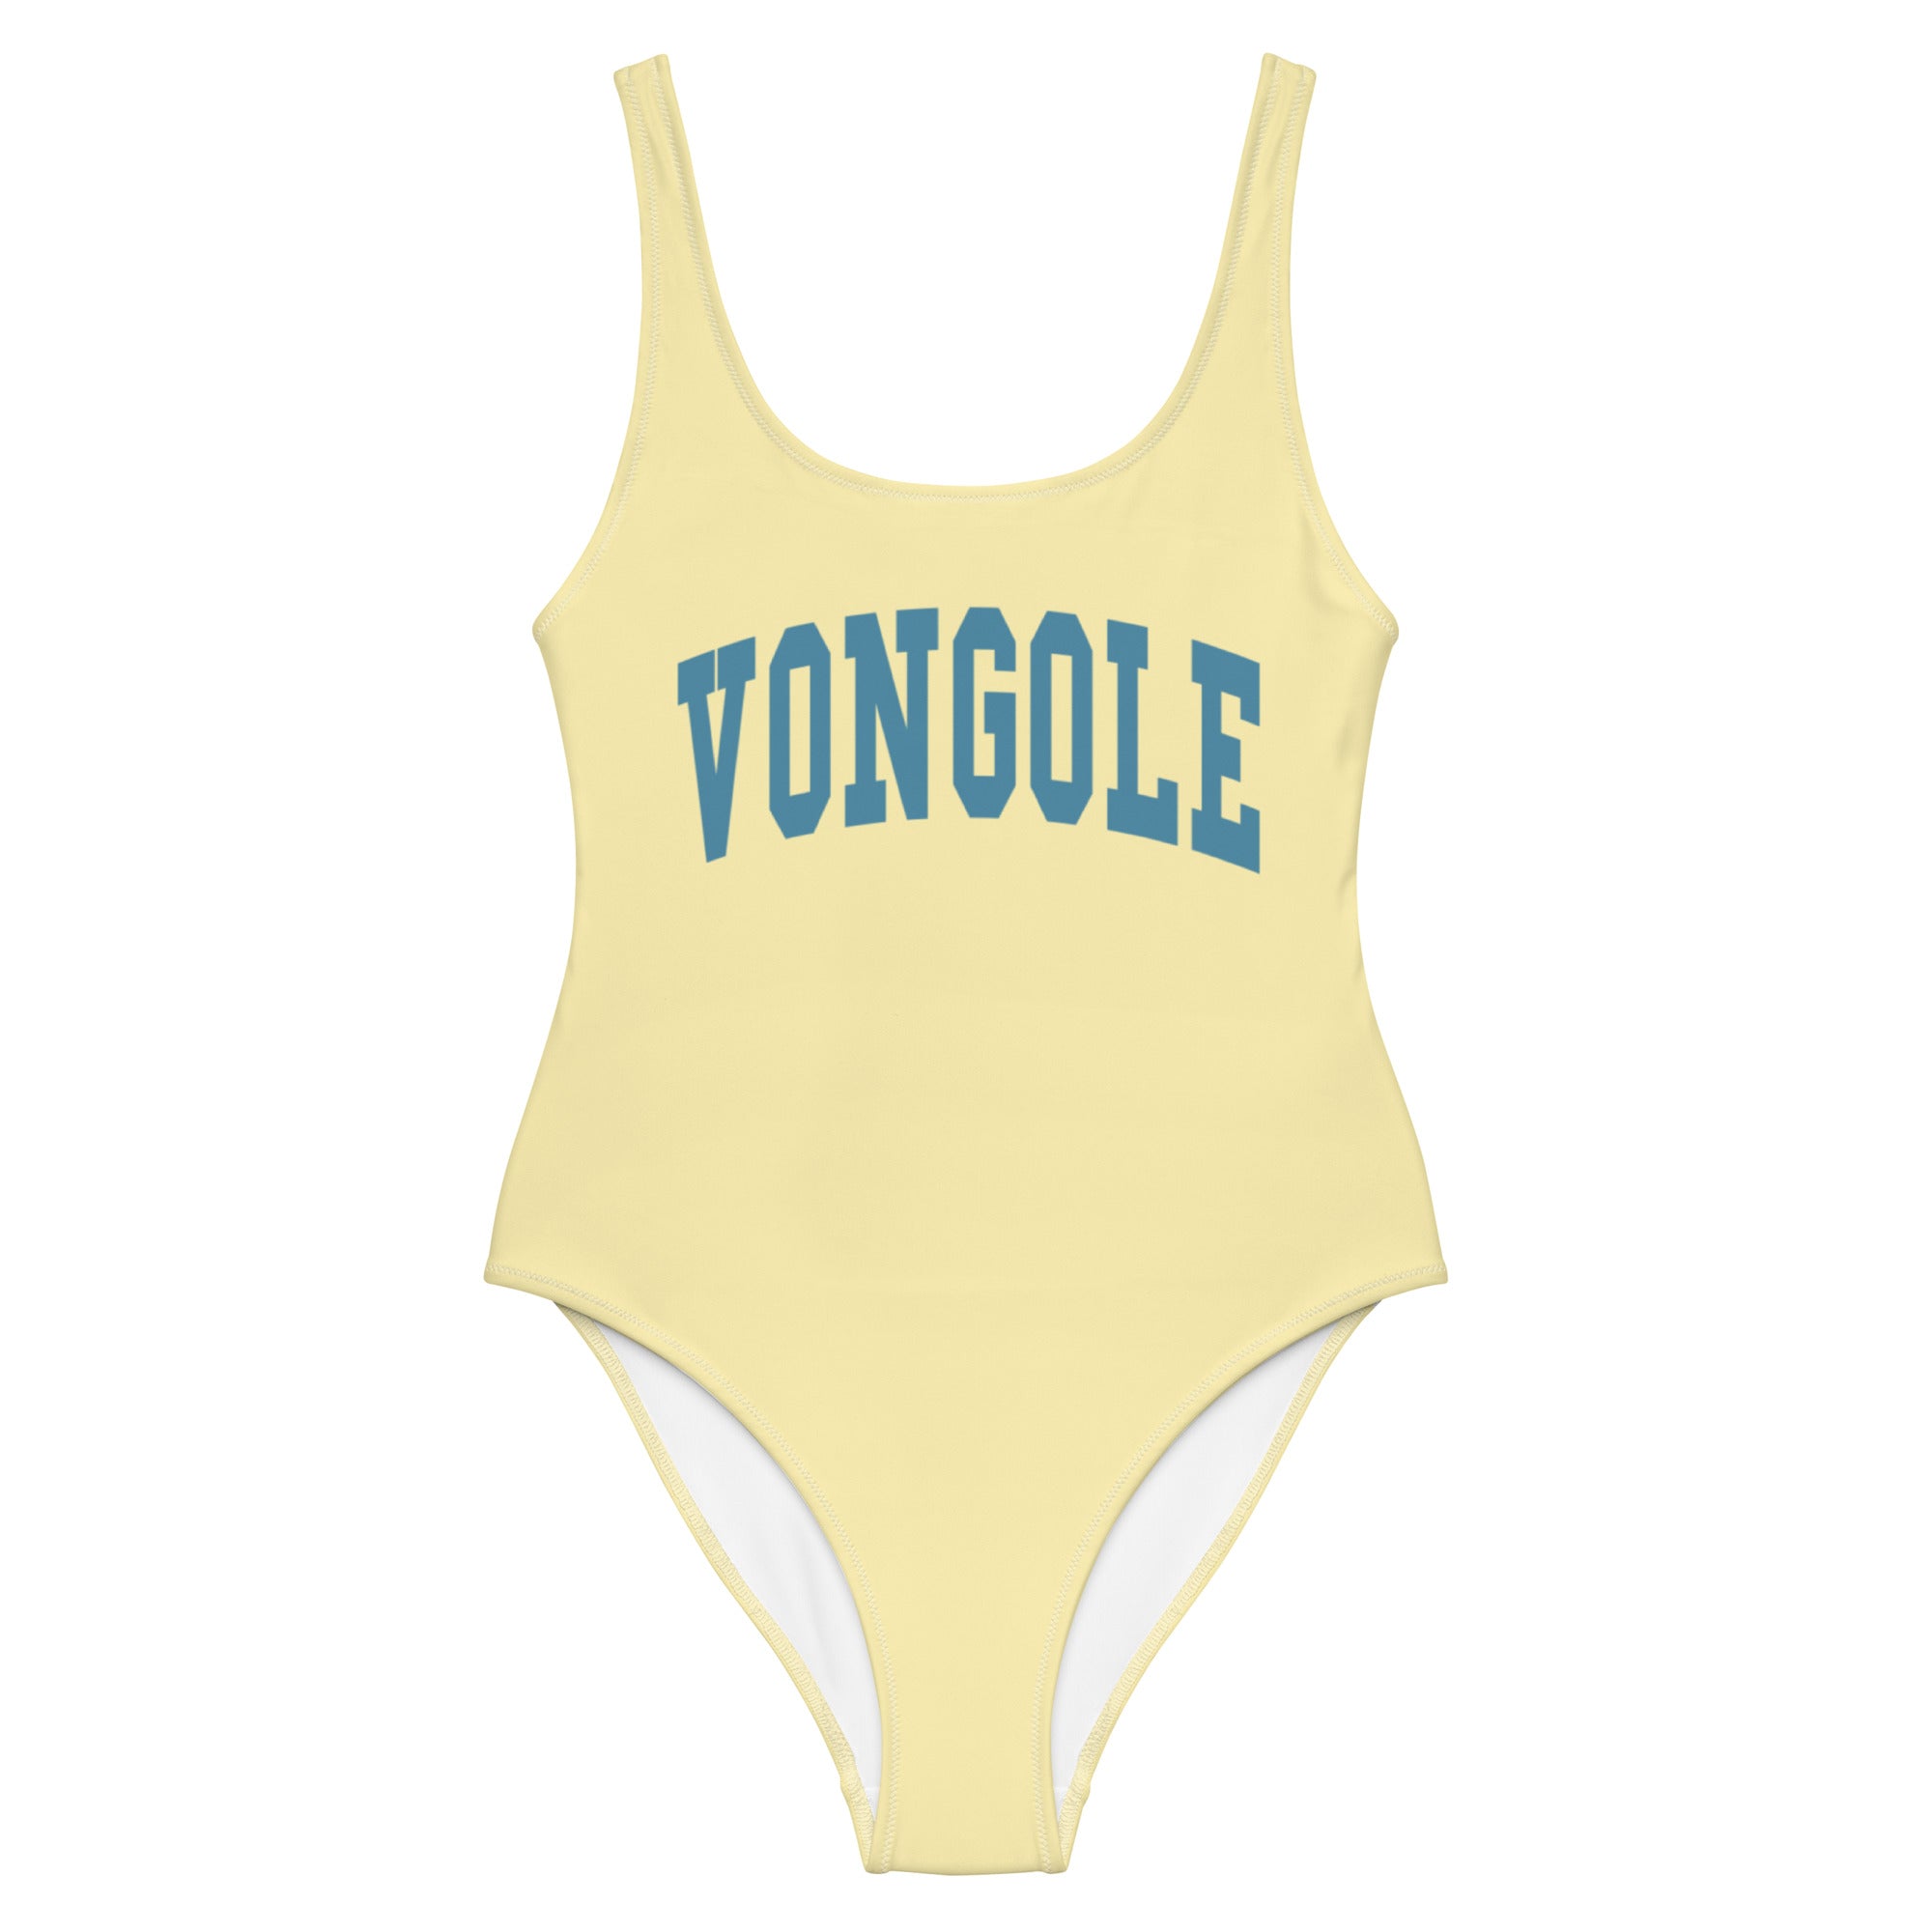 Vongole - Swimsuit - The Refined Spirit